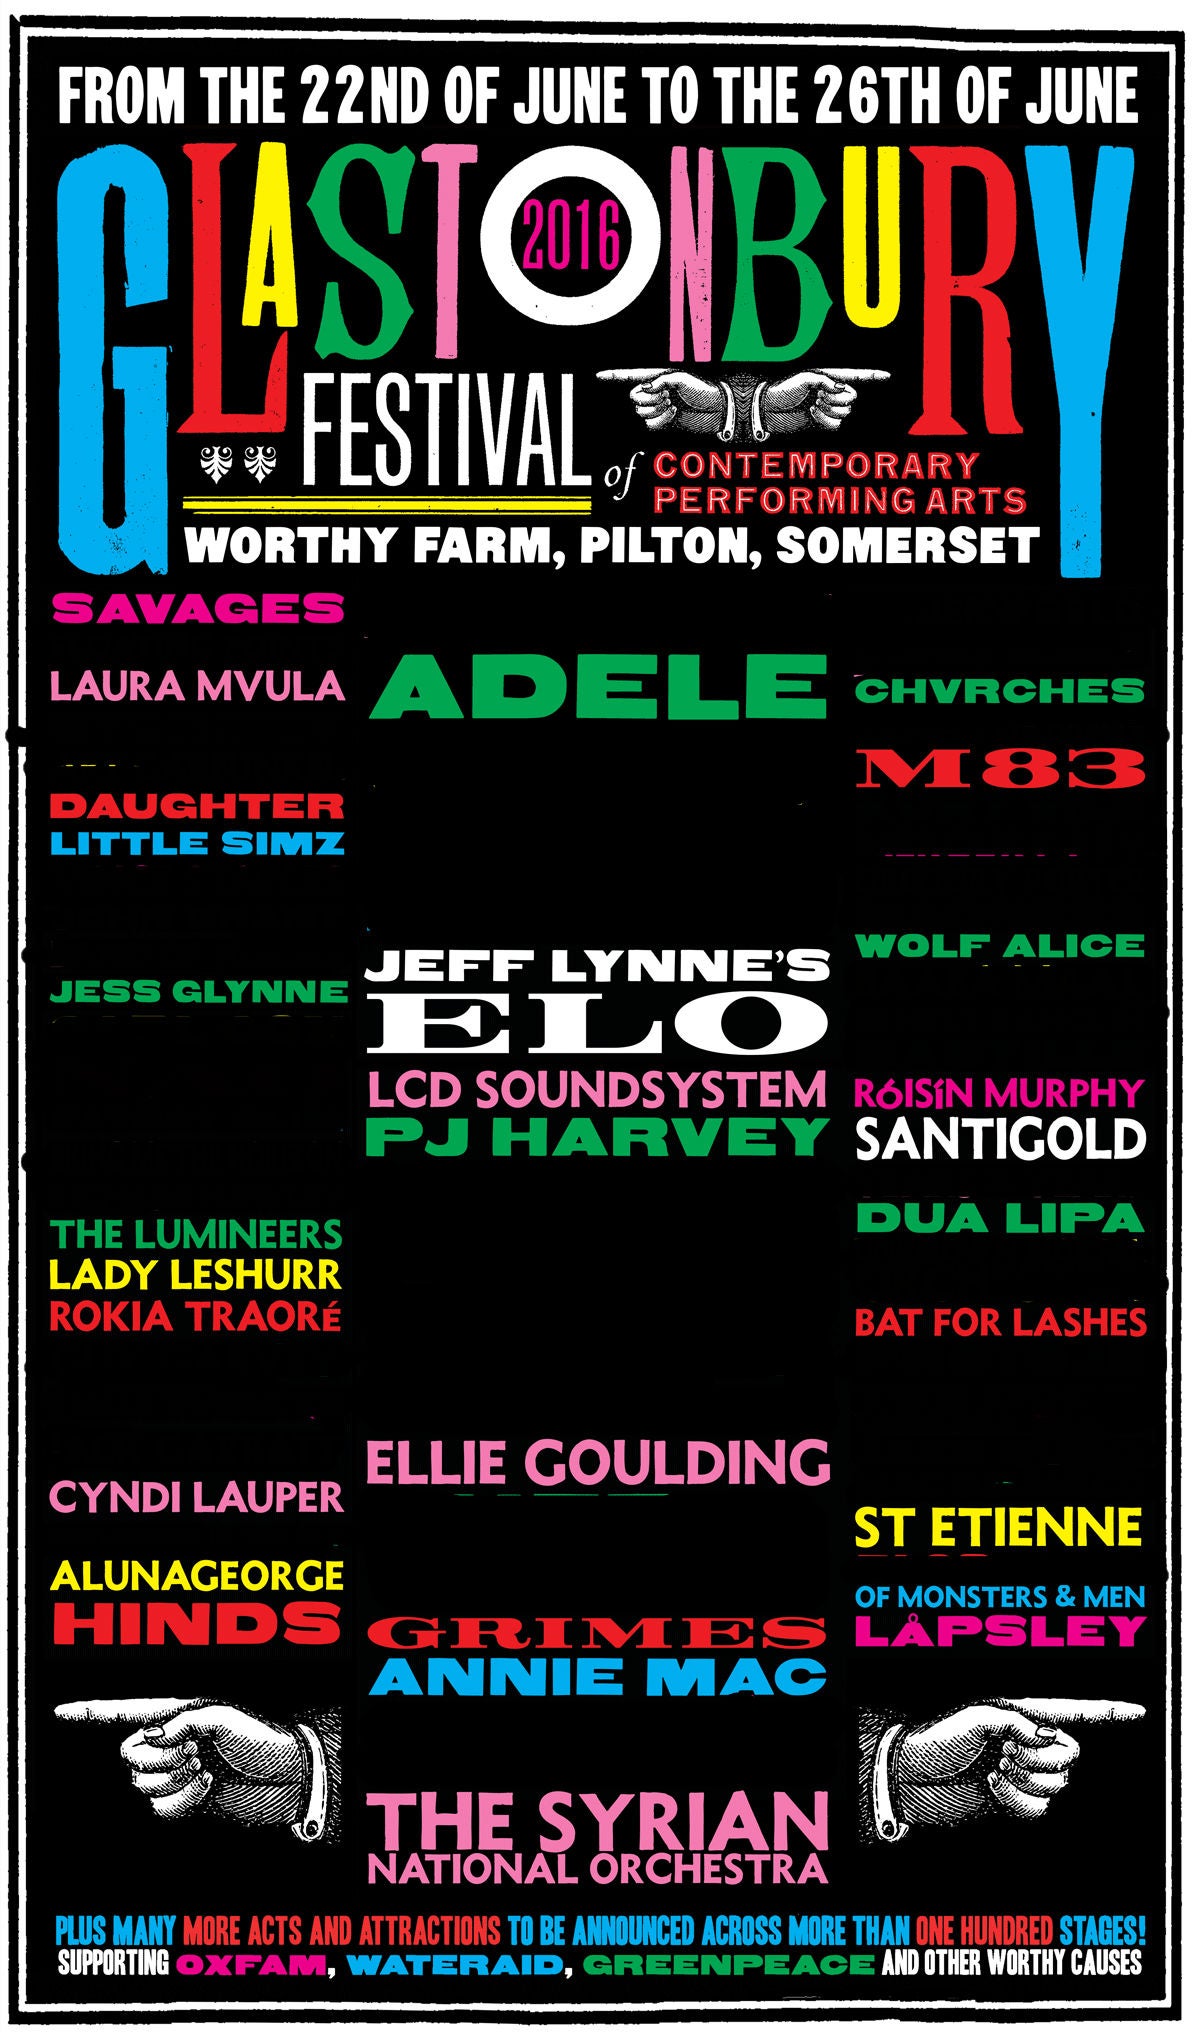 &#13;
The Glastonbury 2016 line-up with the names of all-male acts erased &#13;